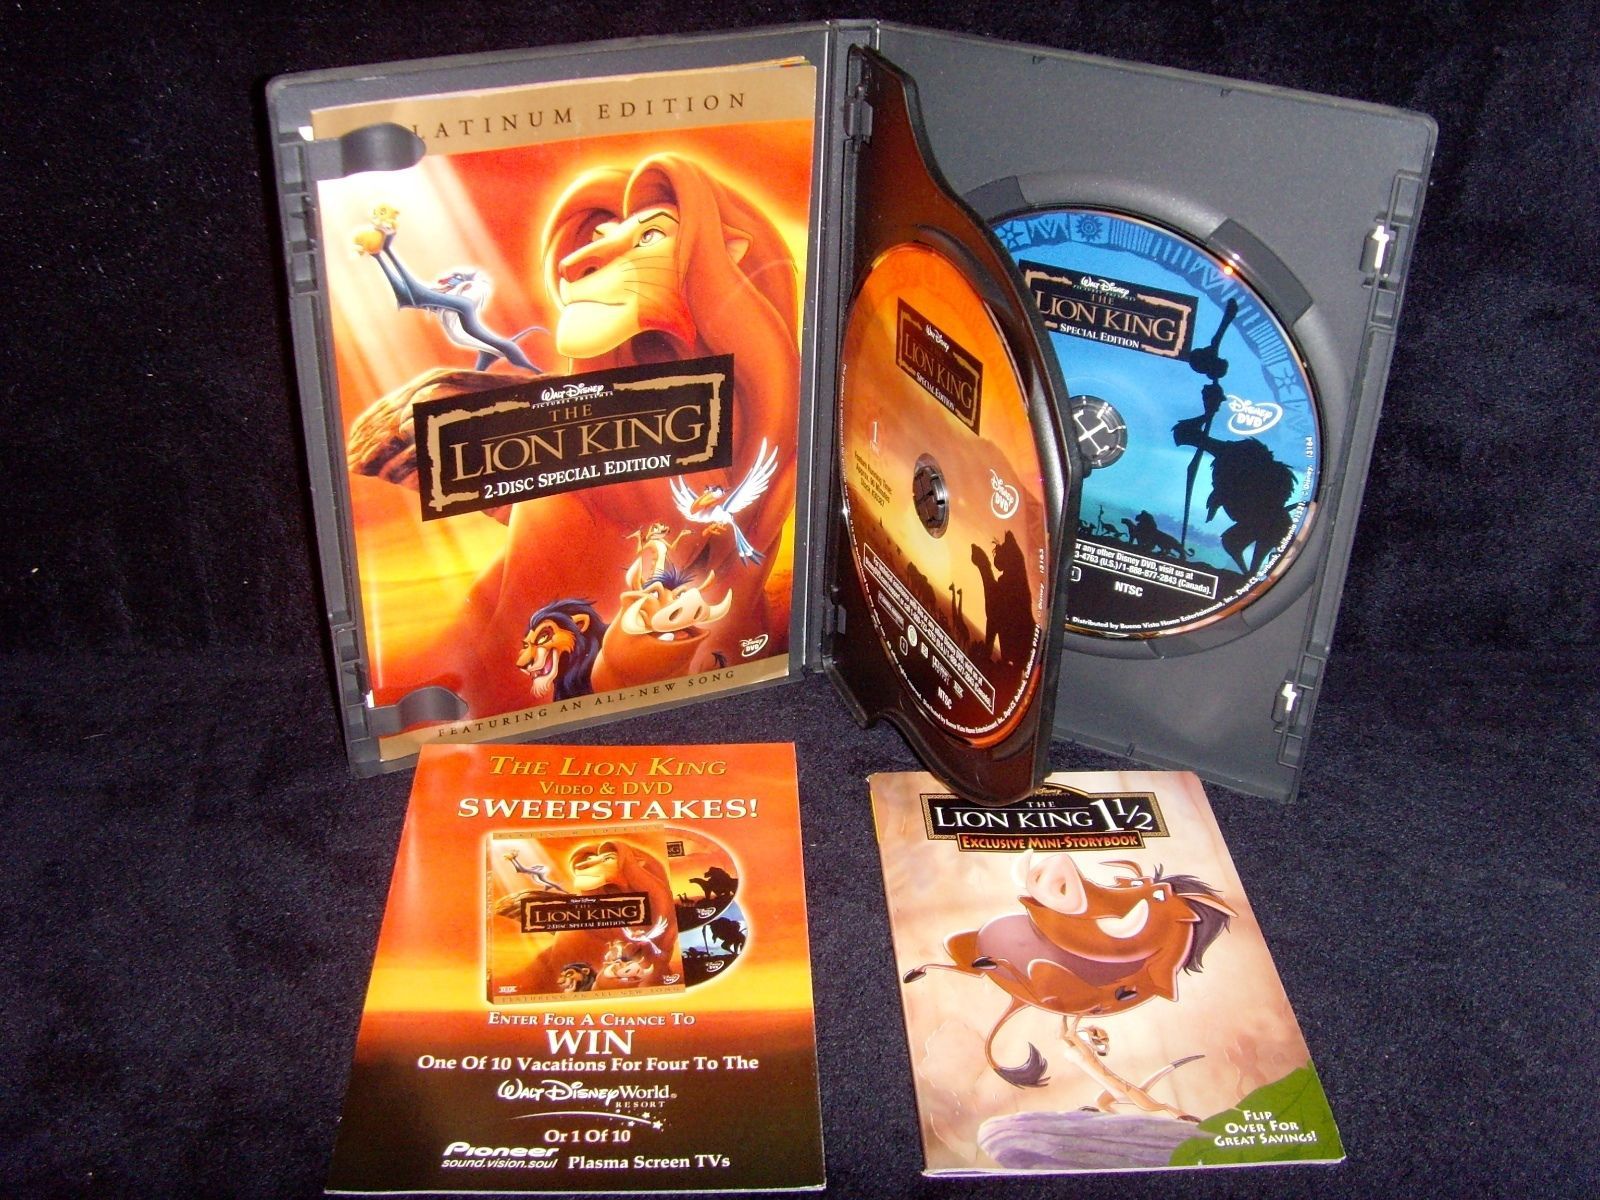 The Lion King Dvd 03 2 Disc Set And 50 Similar Items